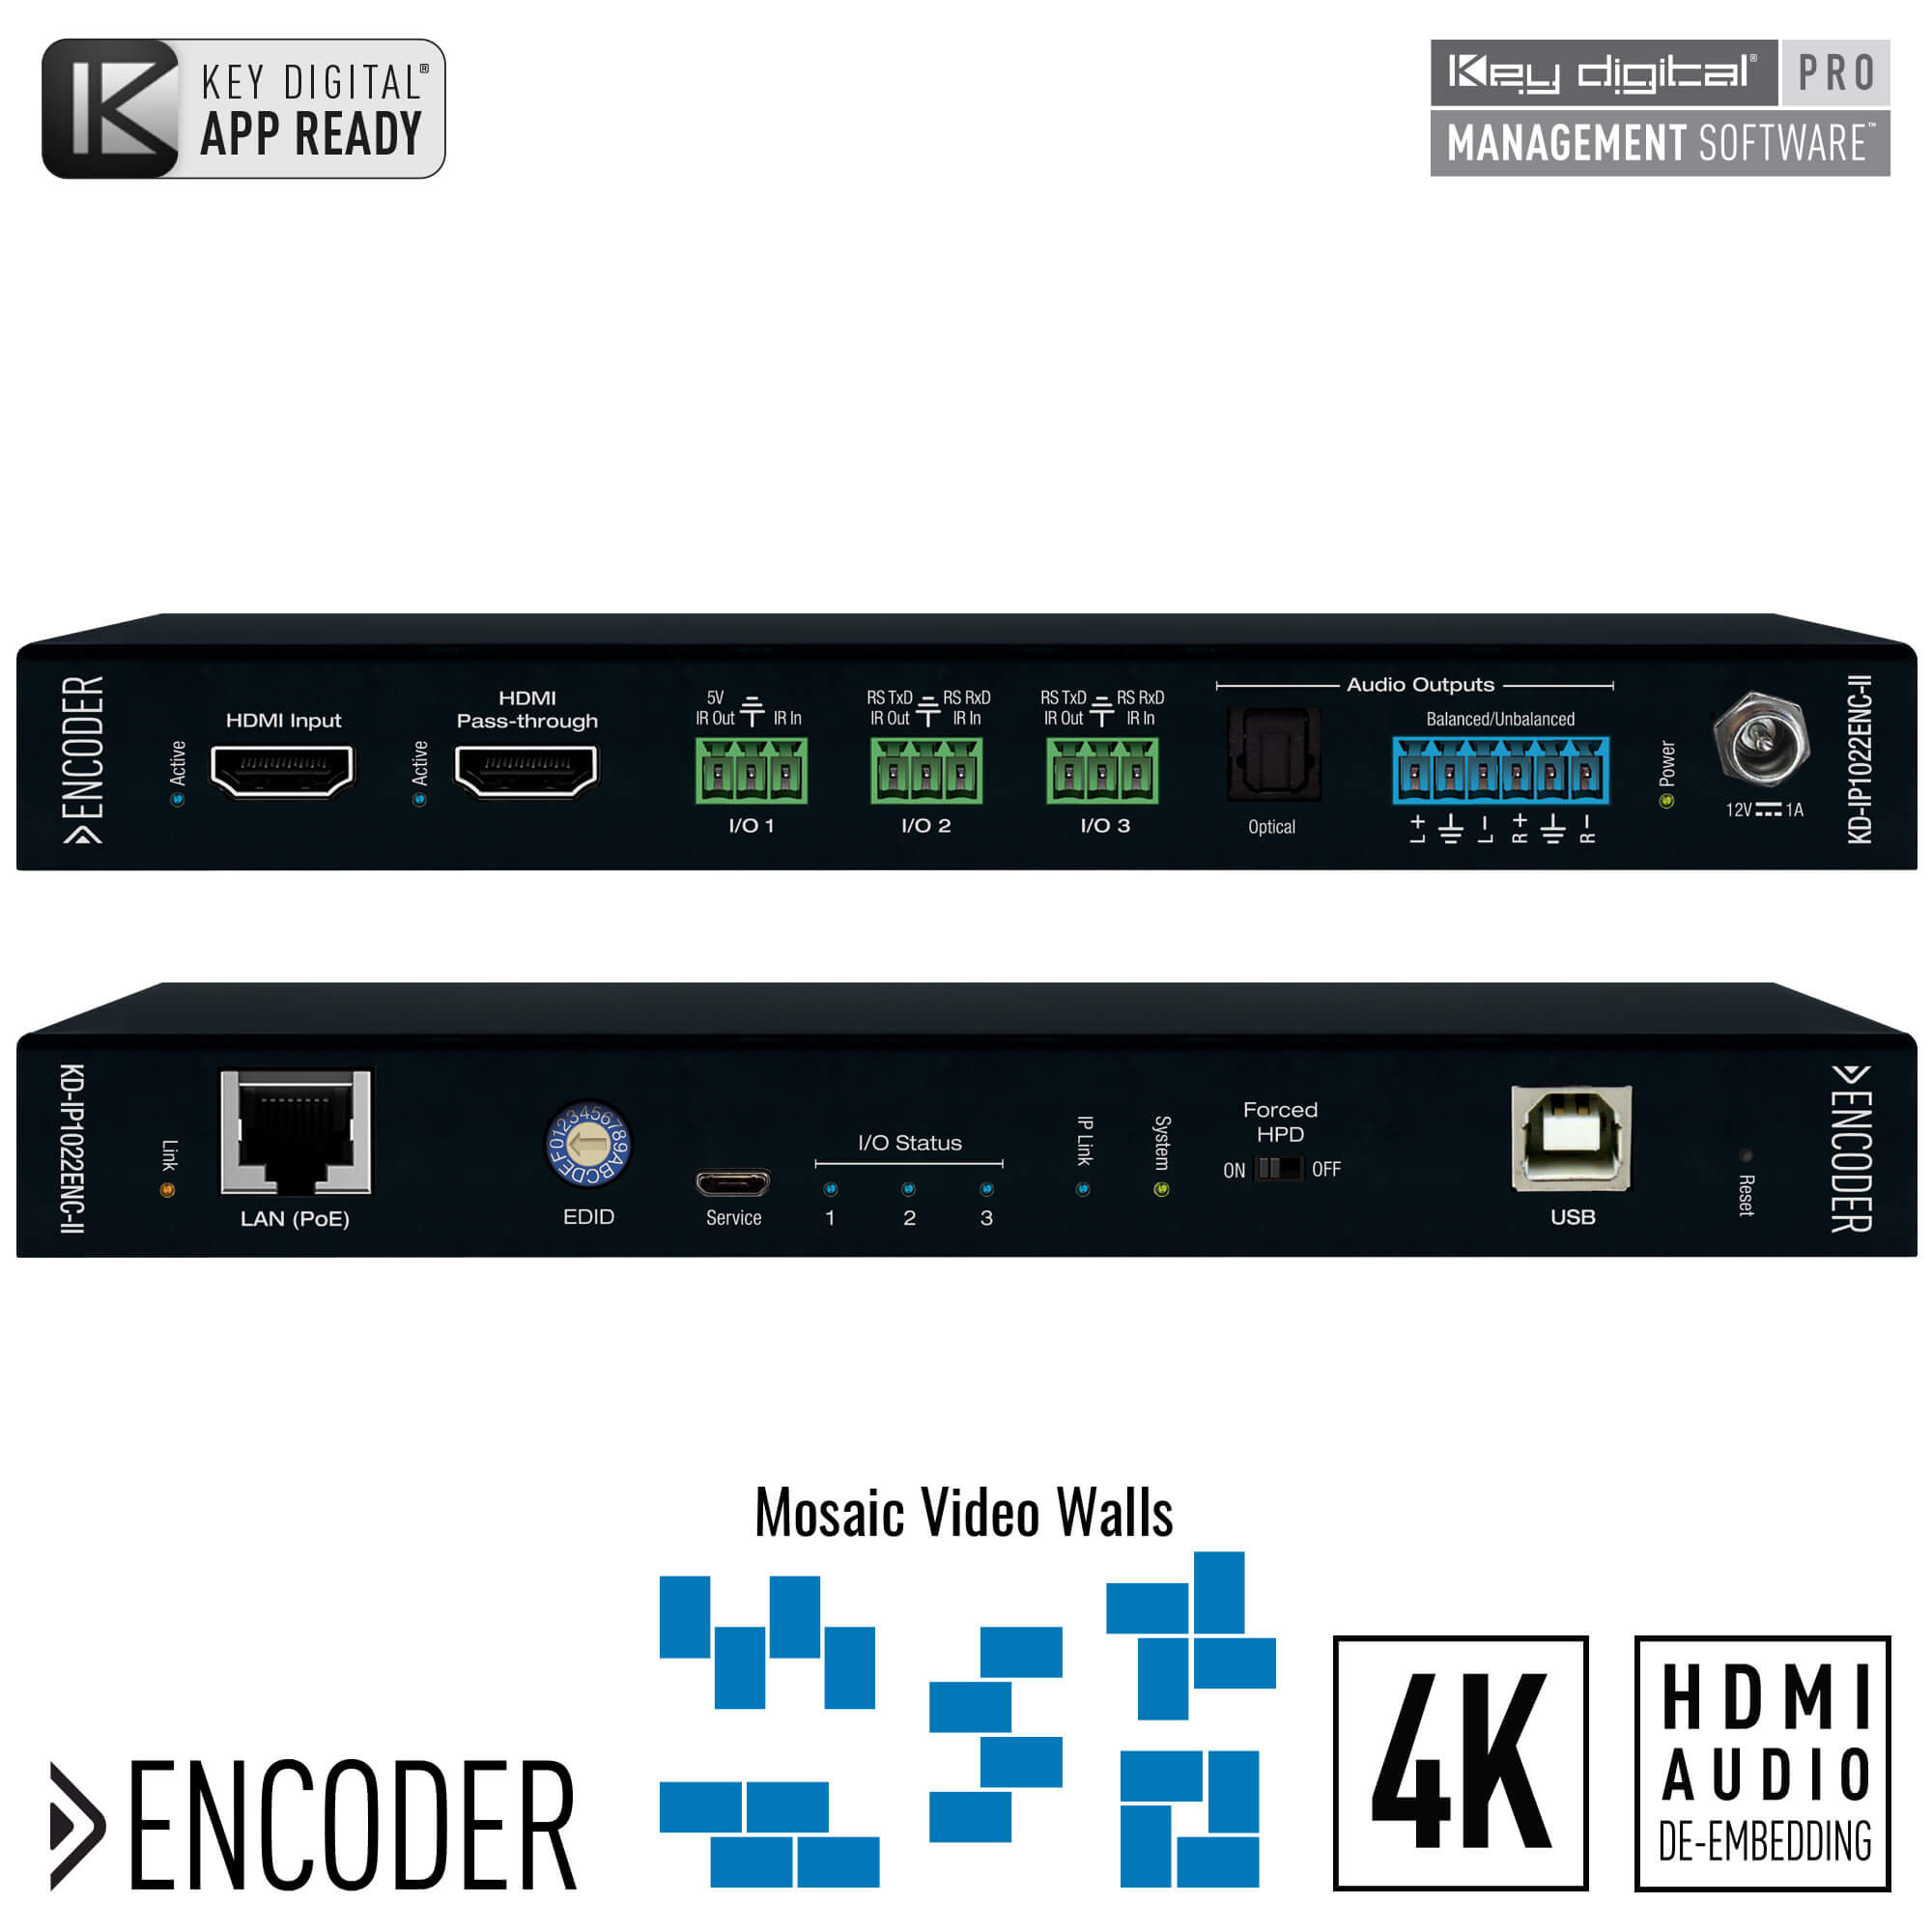 Key Digital 4K UHD AV over IP Encoder with Independent Video, Audio, KVM/USB Routing. Audio De-Embed with Volume, Delay, and Bass/Mid/Treble Control, 2 port PoE LAN Switch, HDMI Pass-through, 3 port IR, RS-232, Trigger Master Controller  - KD-IP1022ENC-II